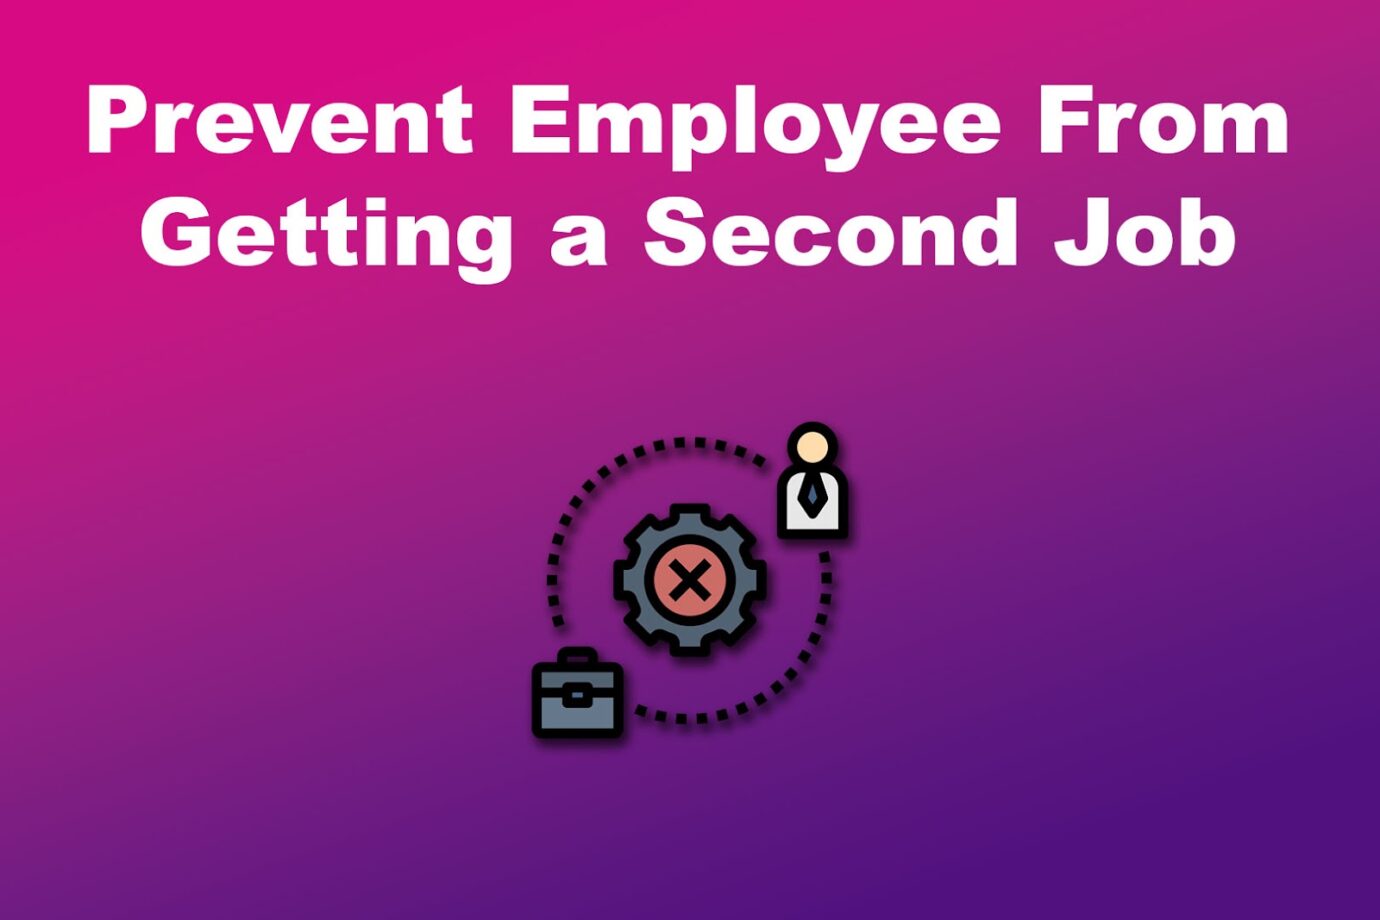 Prevent Employee From Getting a Second Job